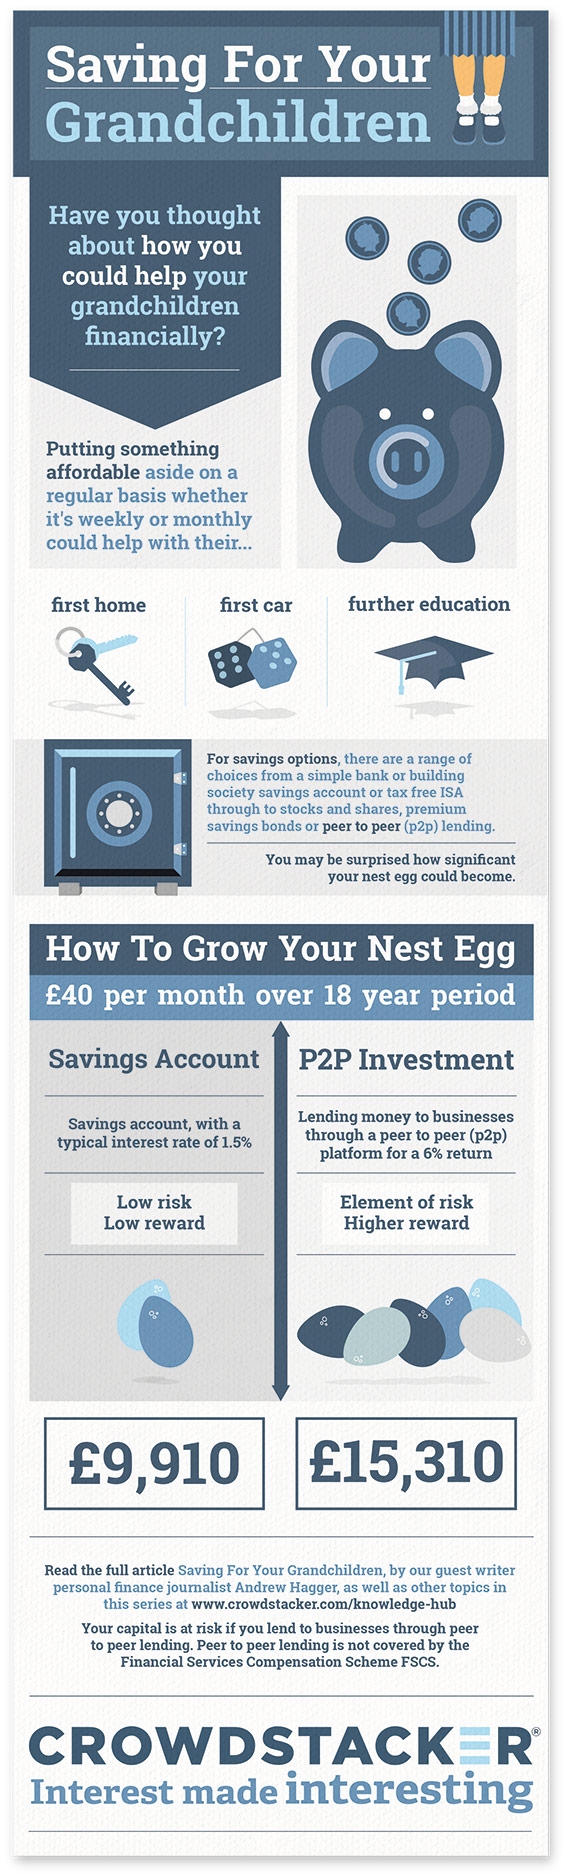 Saving for Your Grandchildren - An Infographic